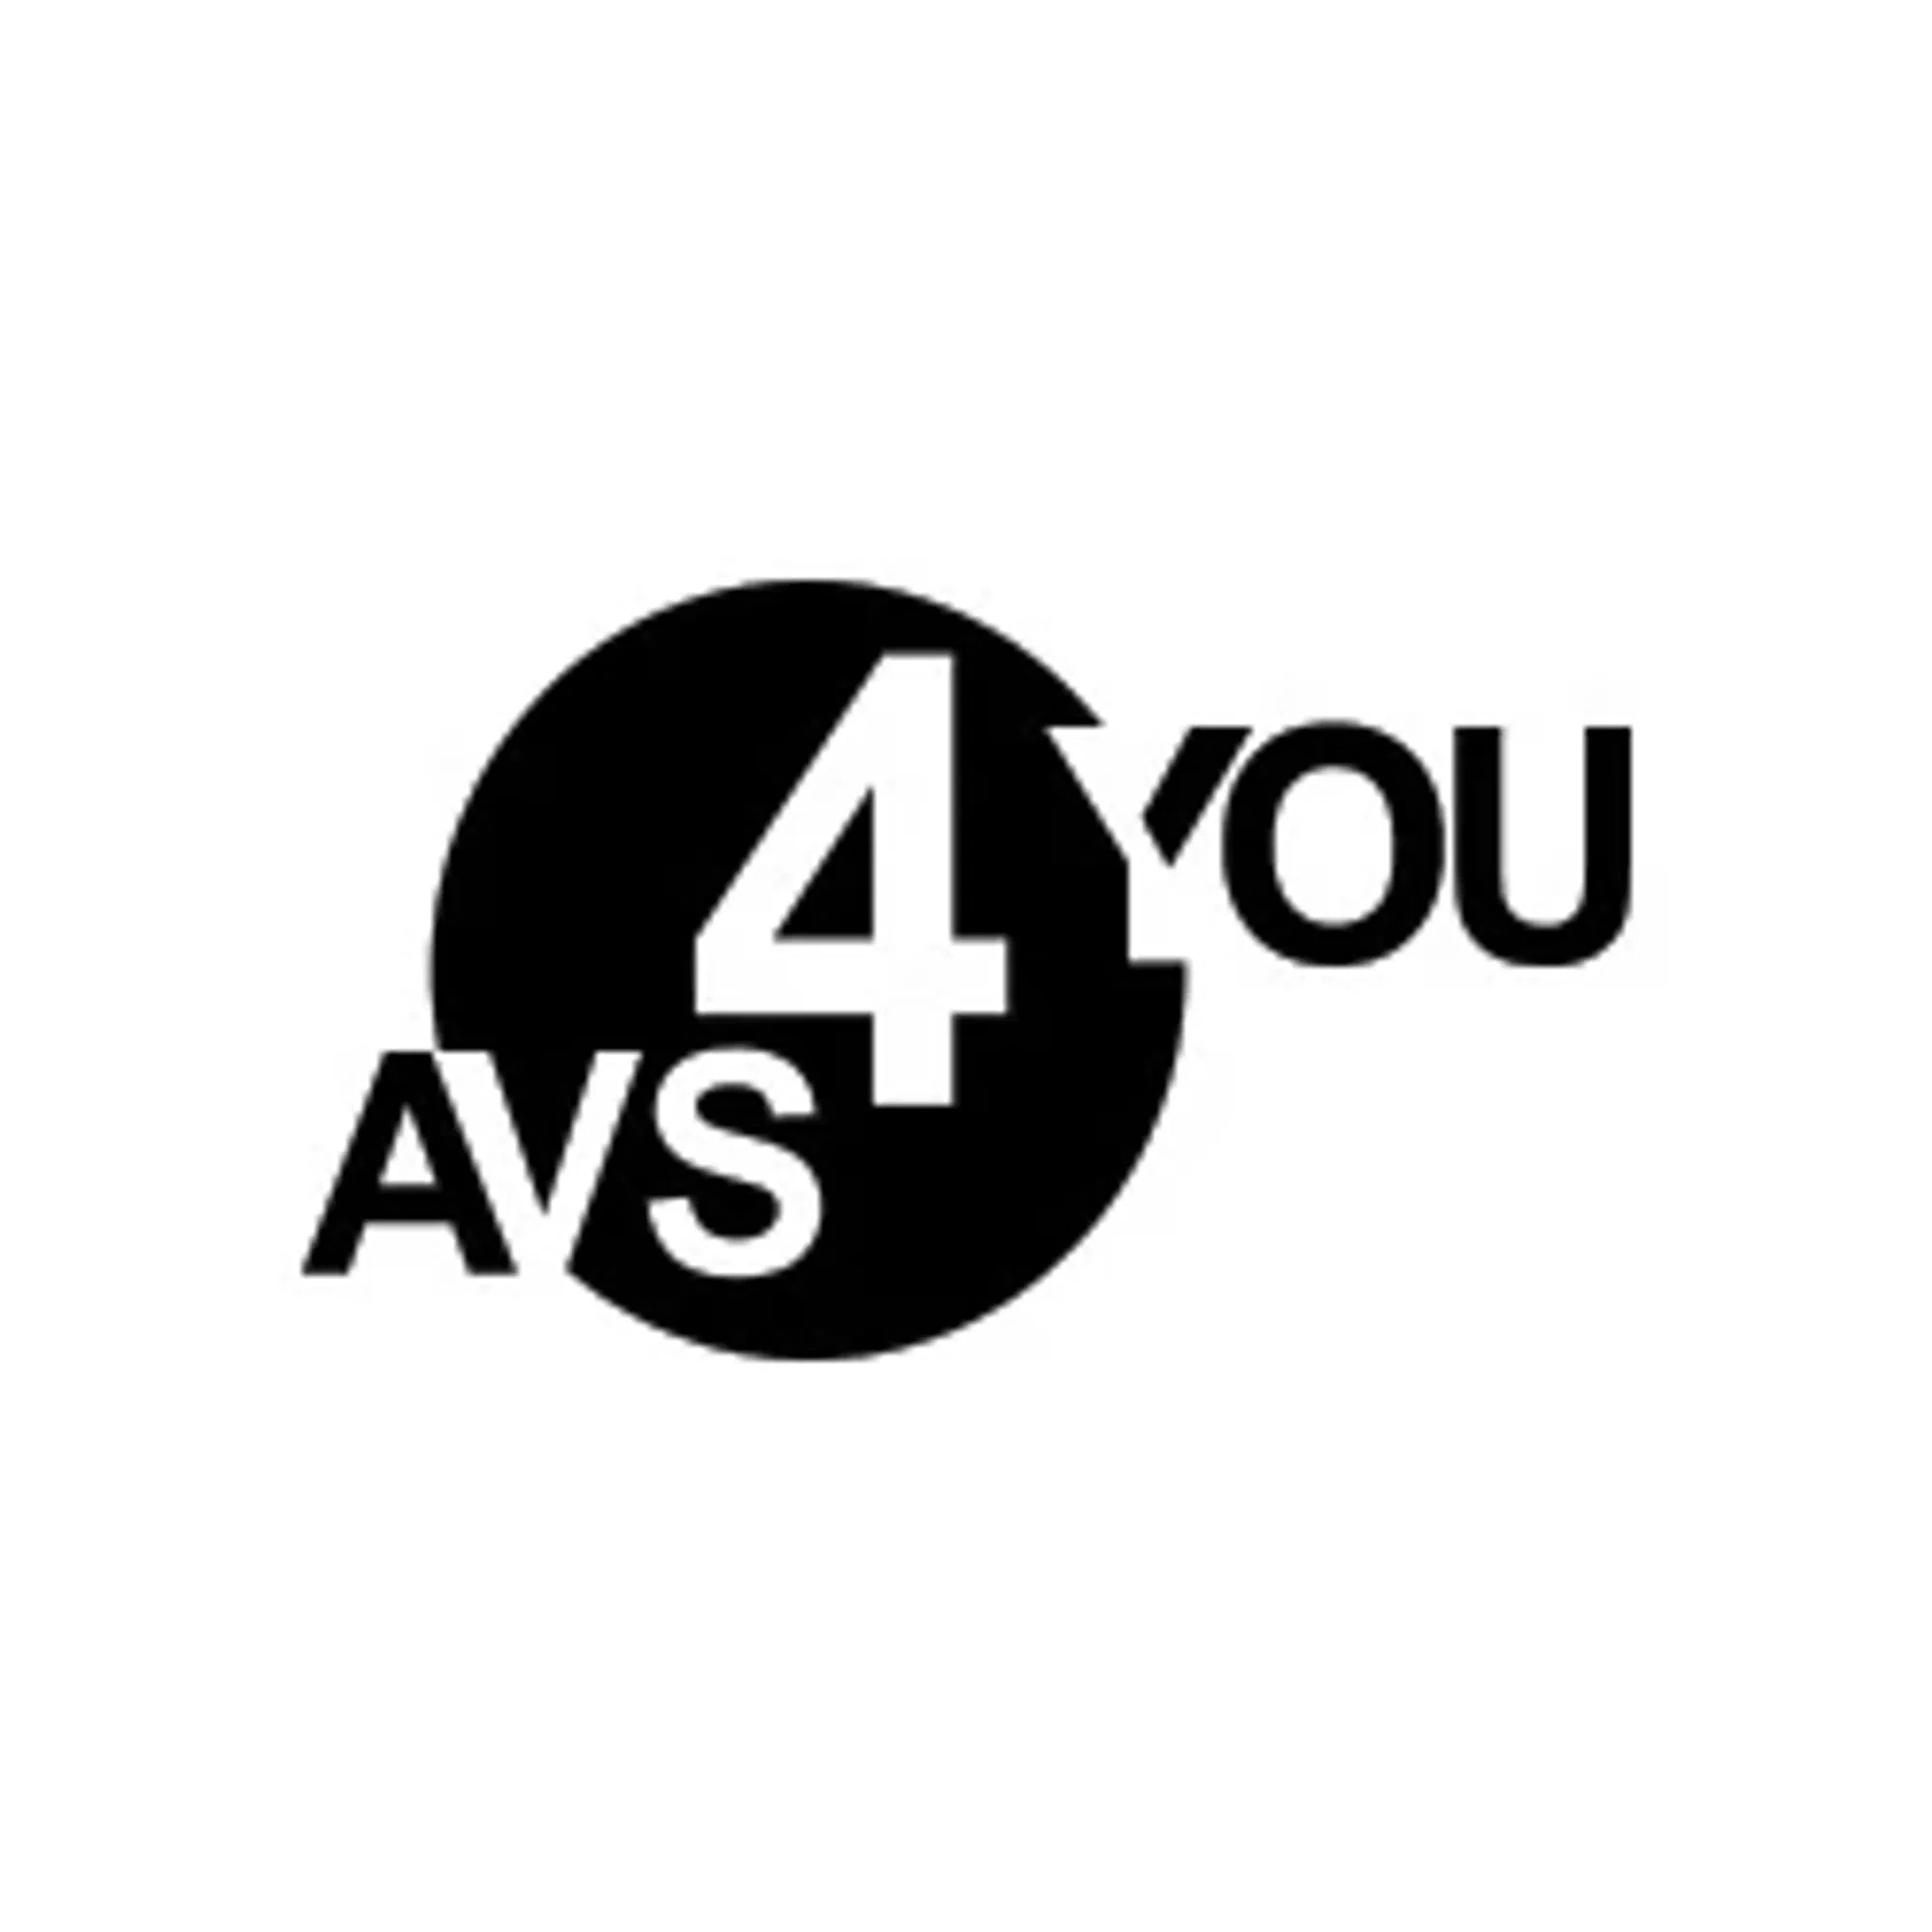 avs4you activation code free